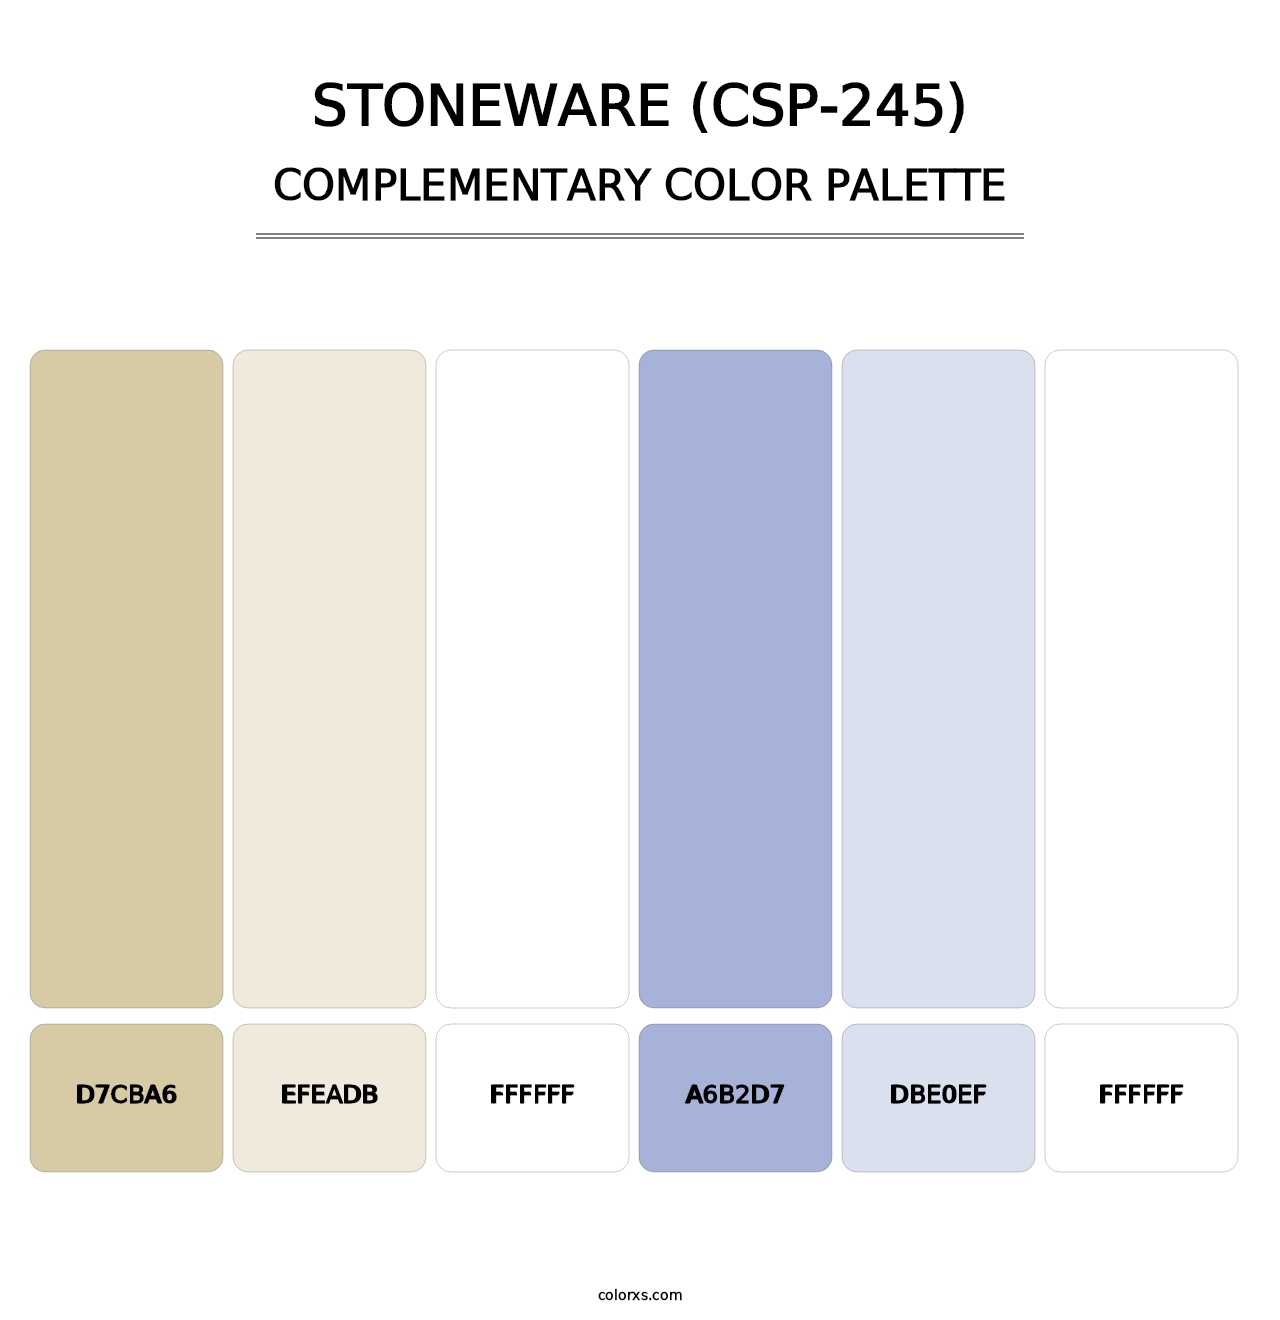 Stoneware (CSP-245) - Complementary Color Palette